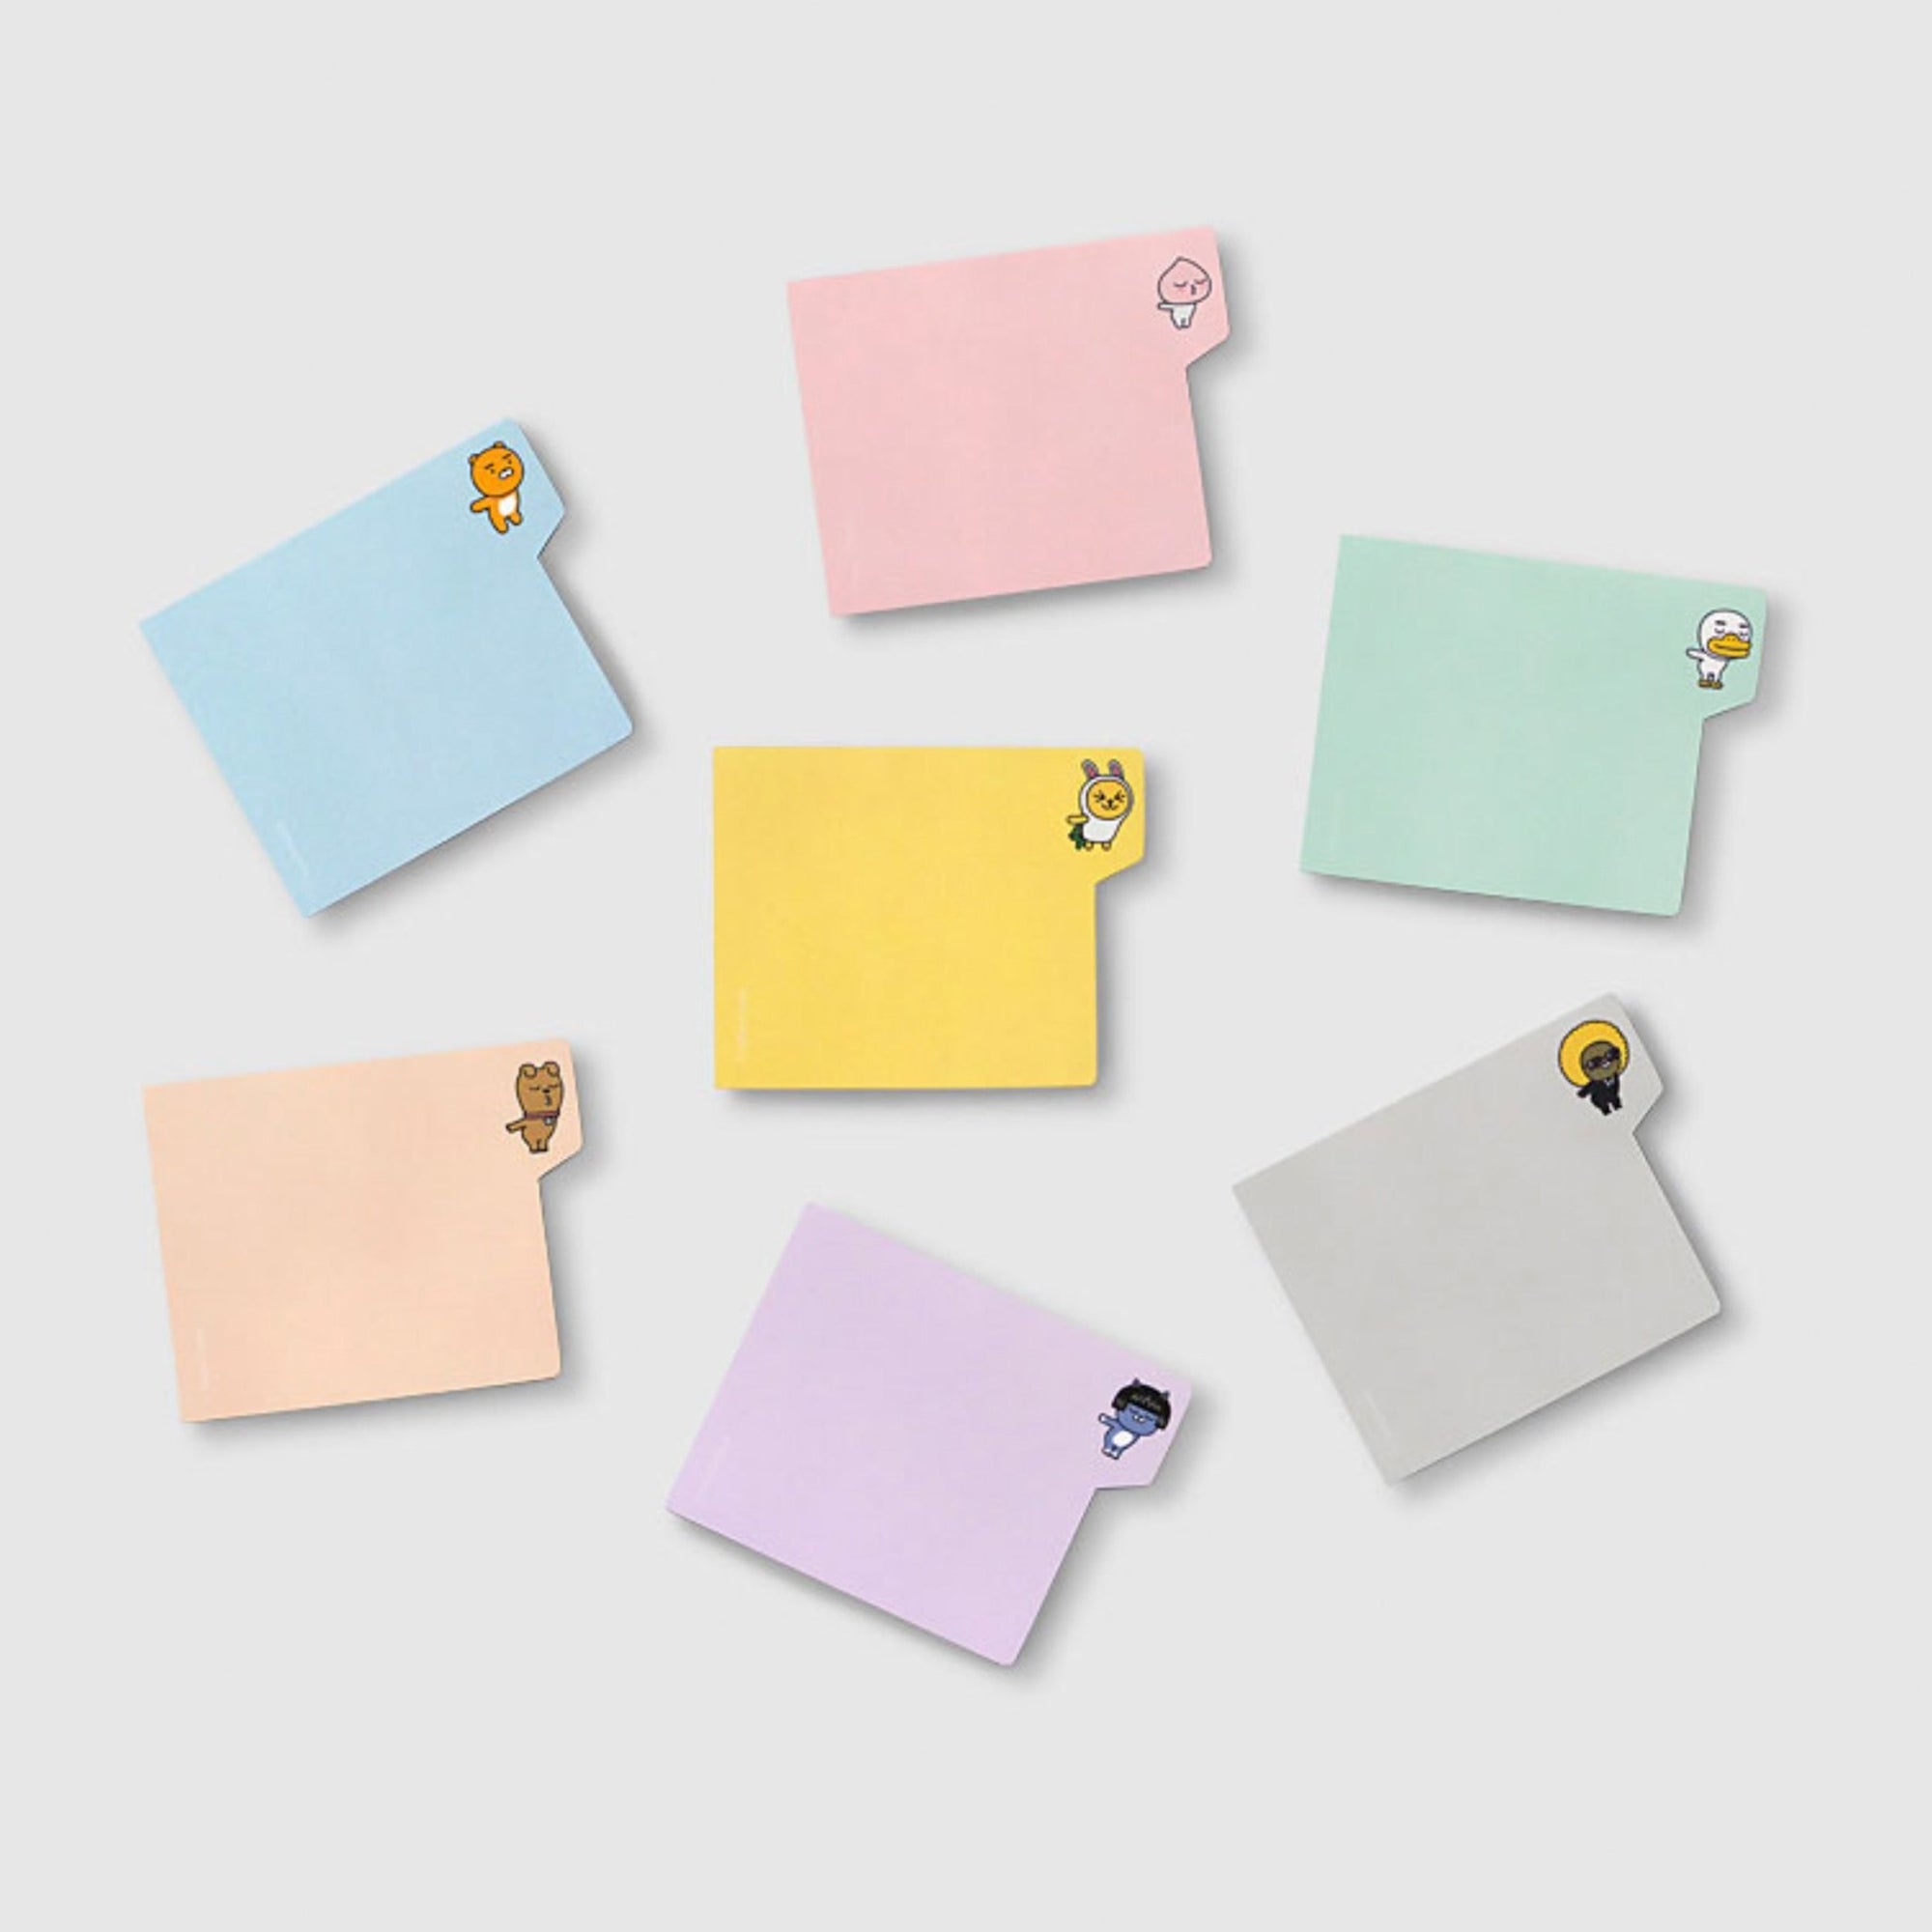 https://cdn.shopify.com/s/files/1/0618/9383/6986/products/kakao-friends-cute-character-sticky-page-marker-note-memo-pad-141585_2000x.jpg?v=1664244120